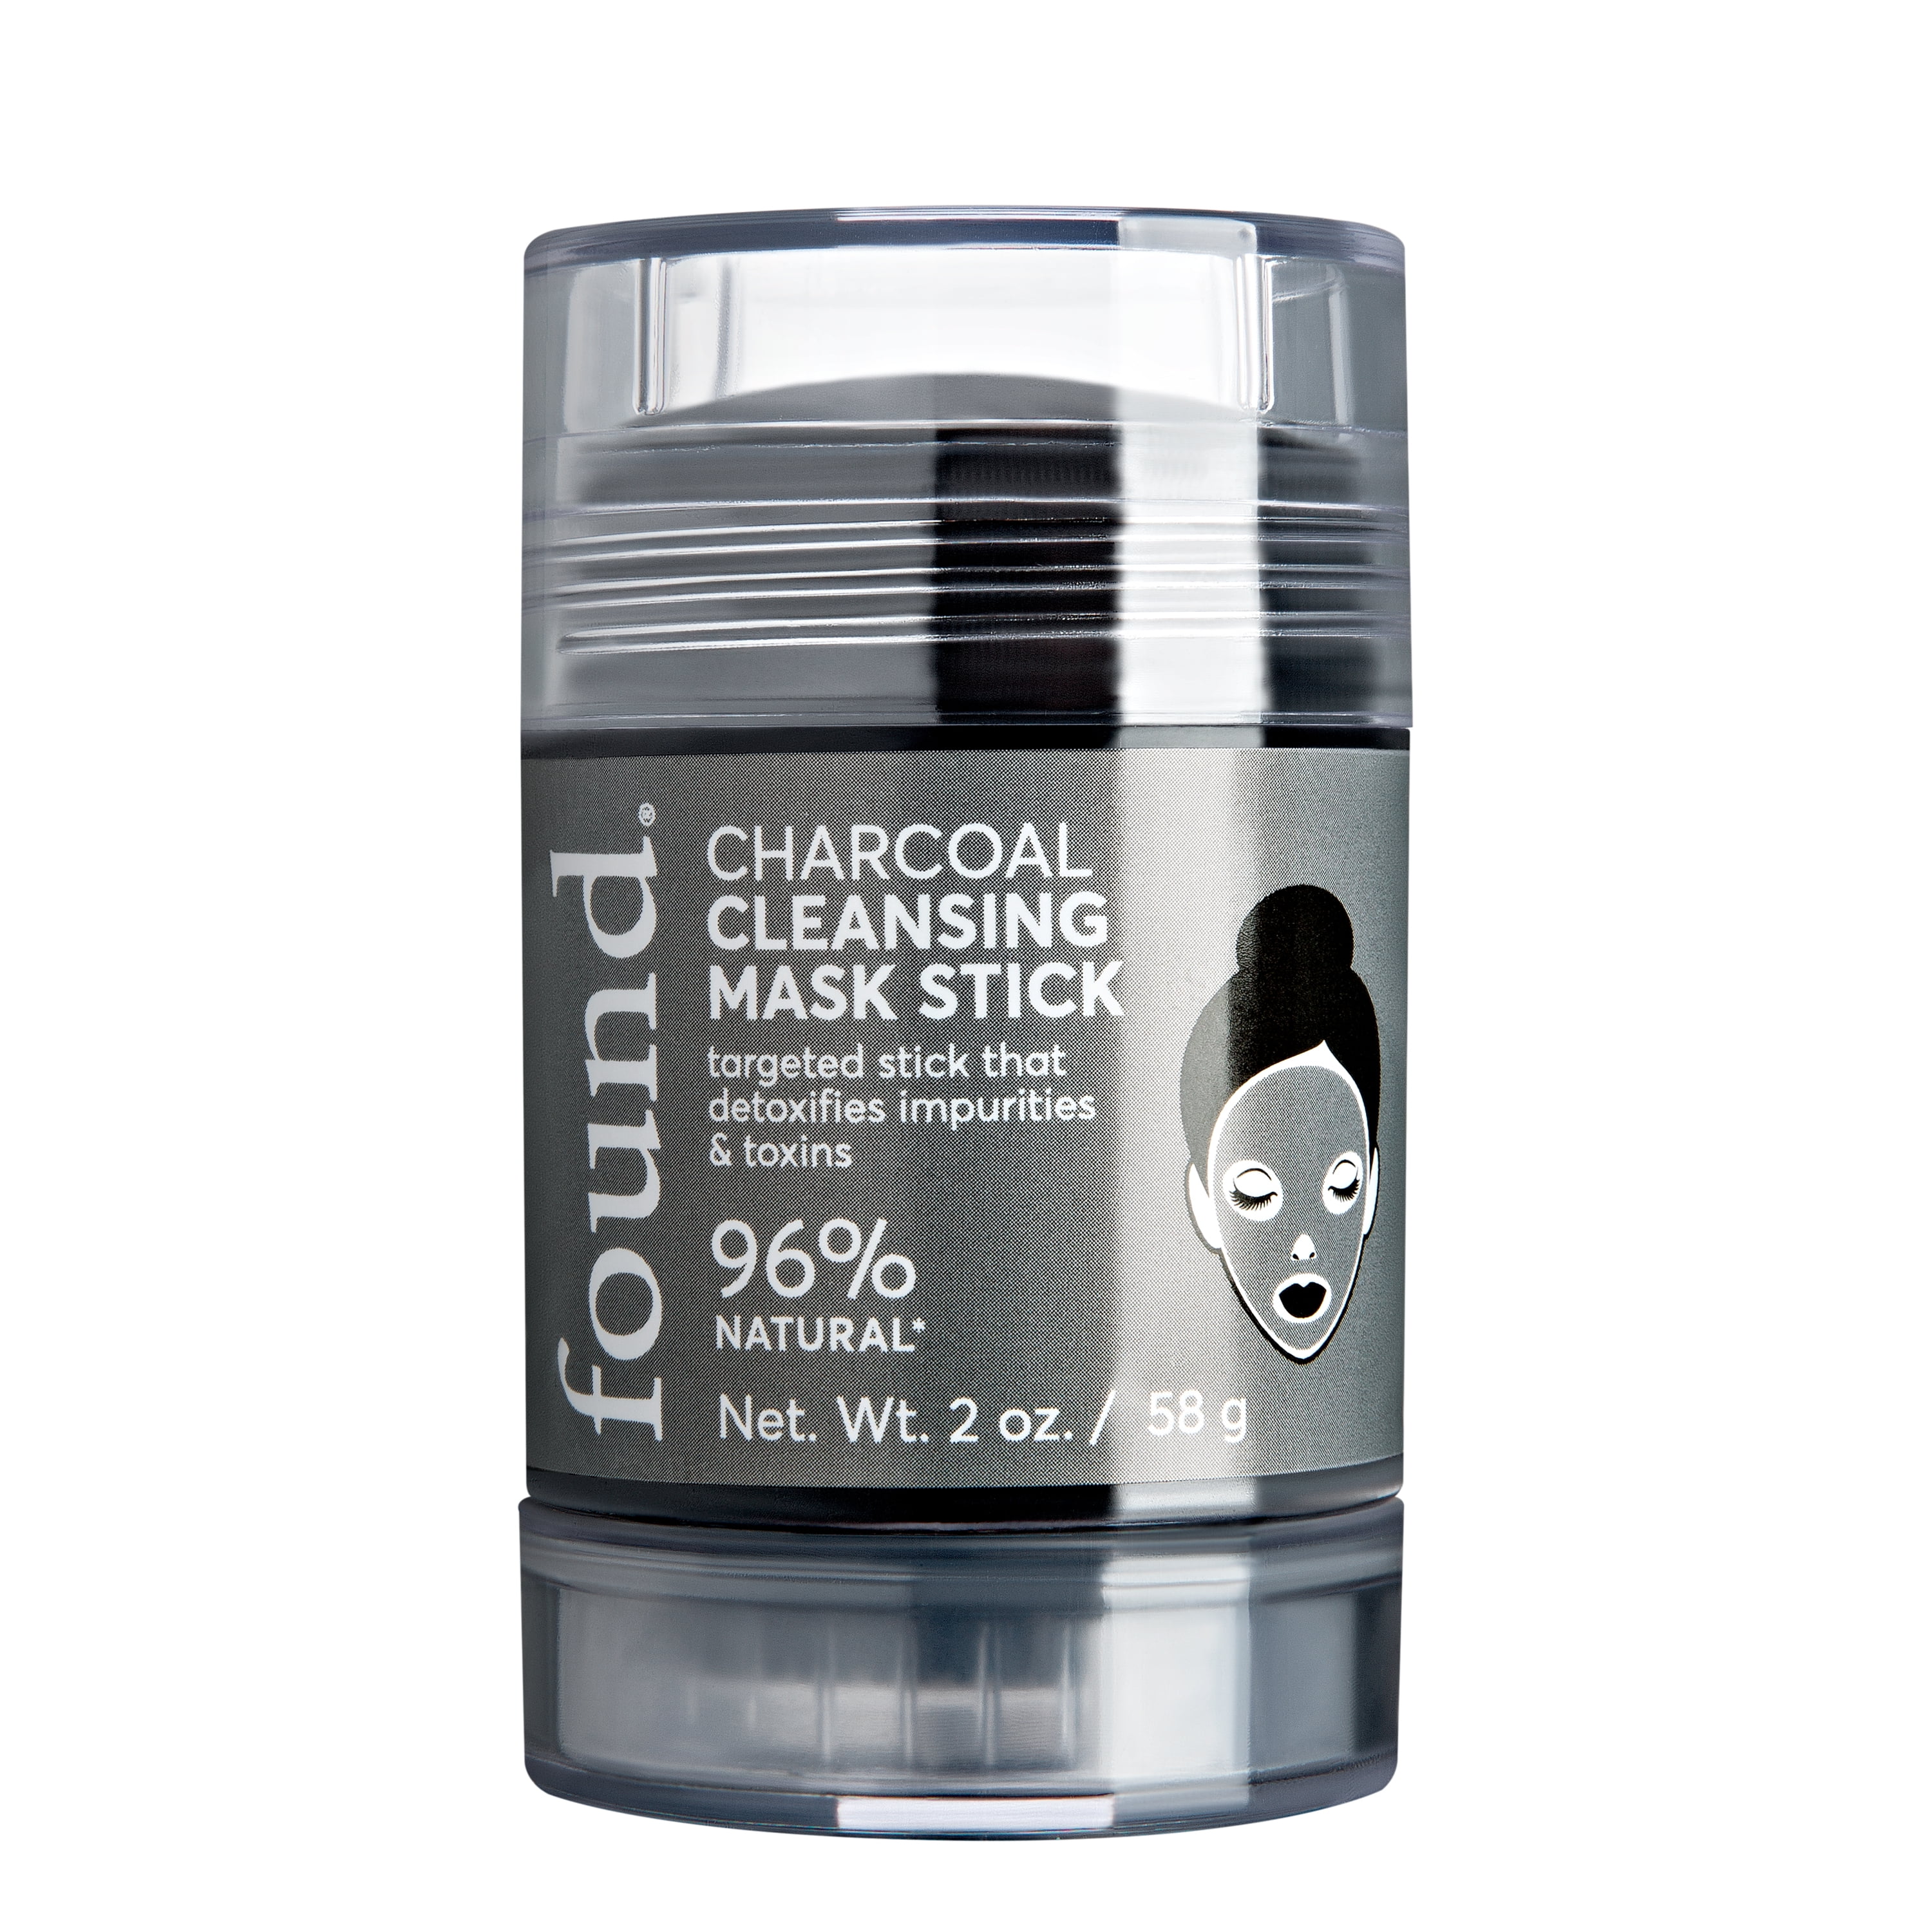 found Charcoal oz 96% Mask Stick 2 Natural, Cleansing